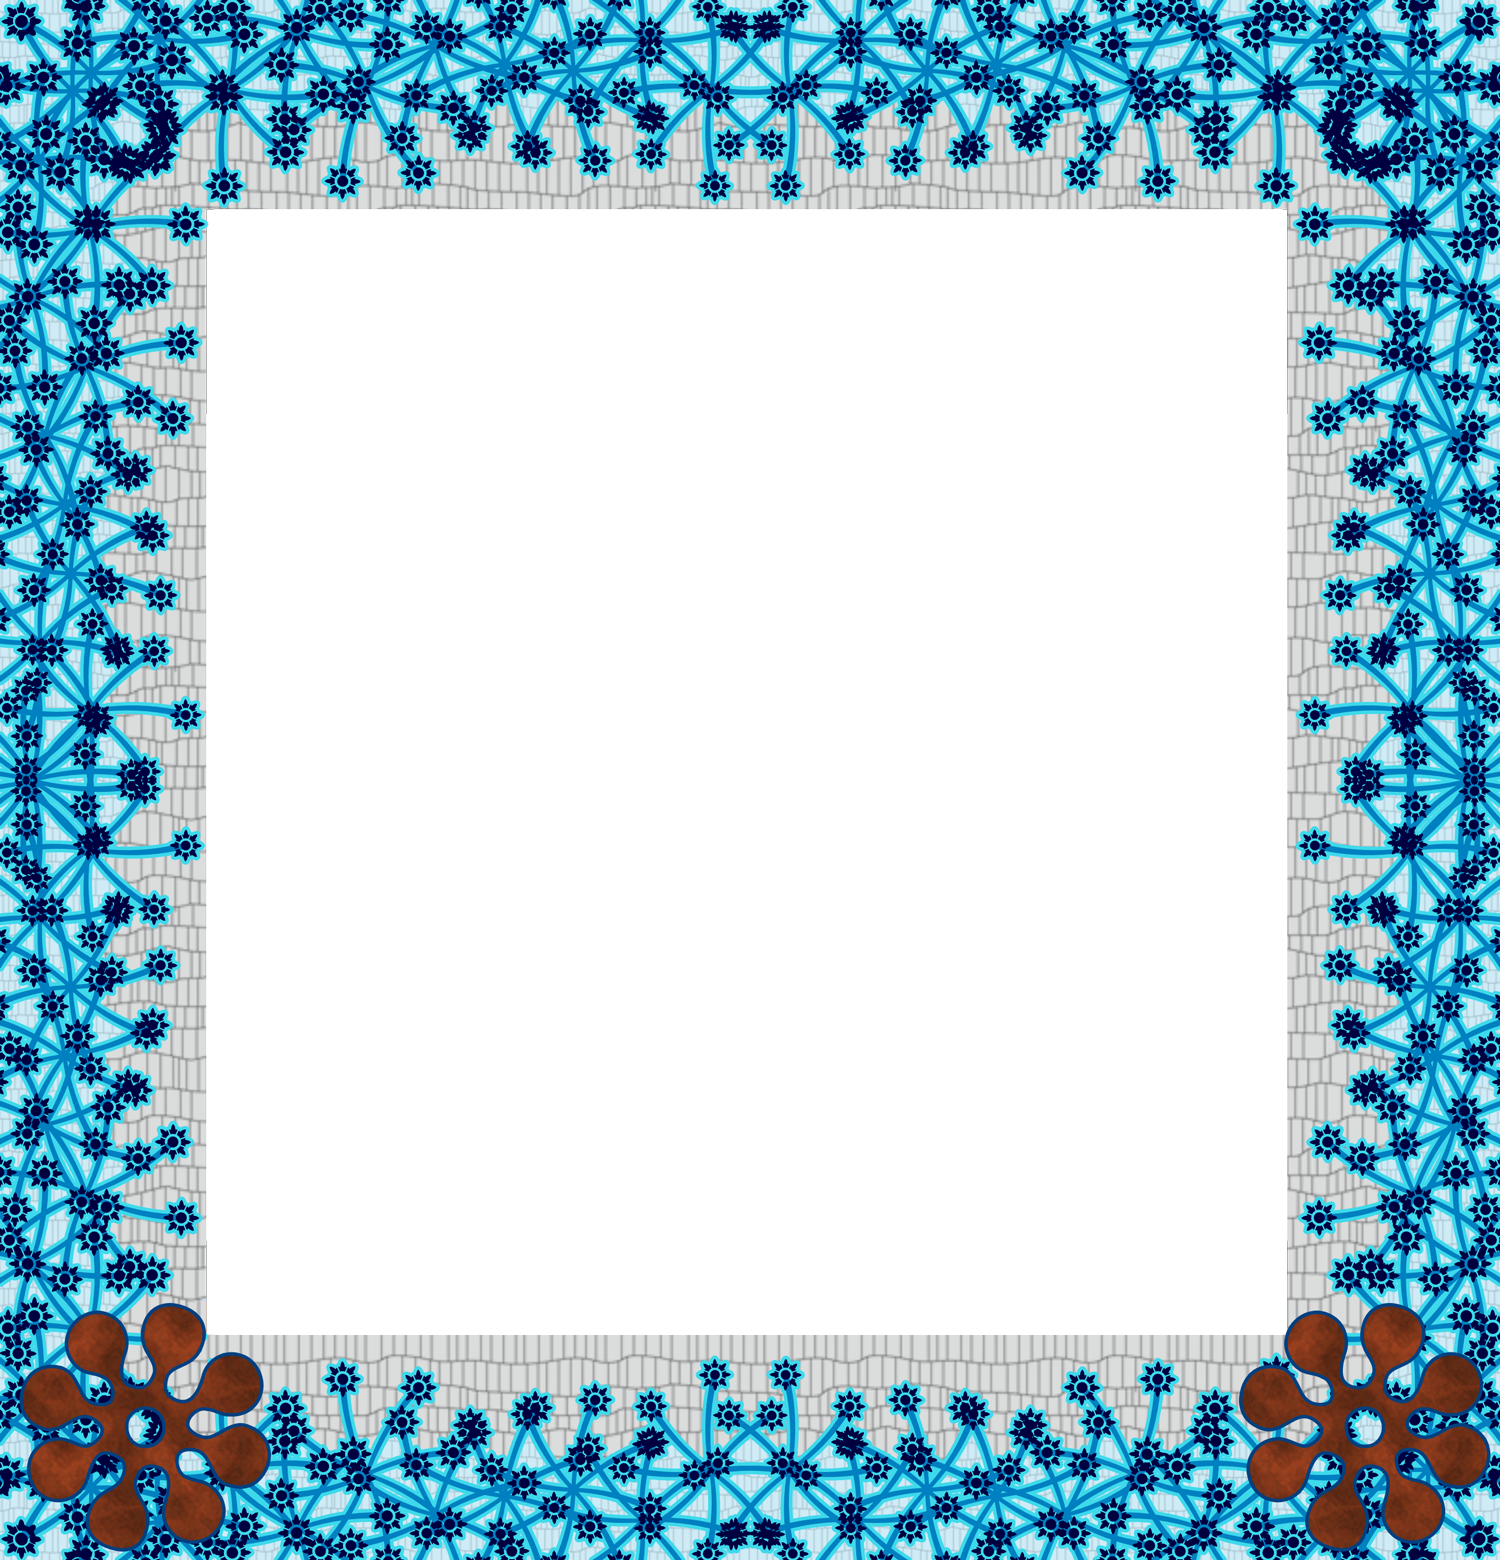 Download PNG image - Square Teal Frame PNG Photos 